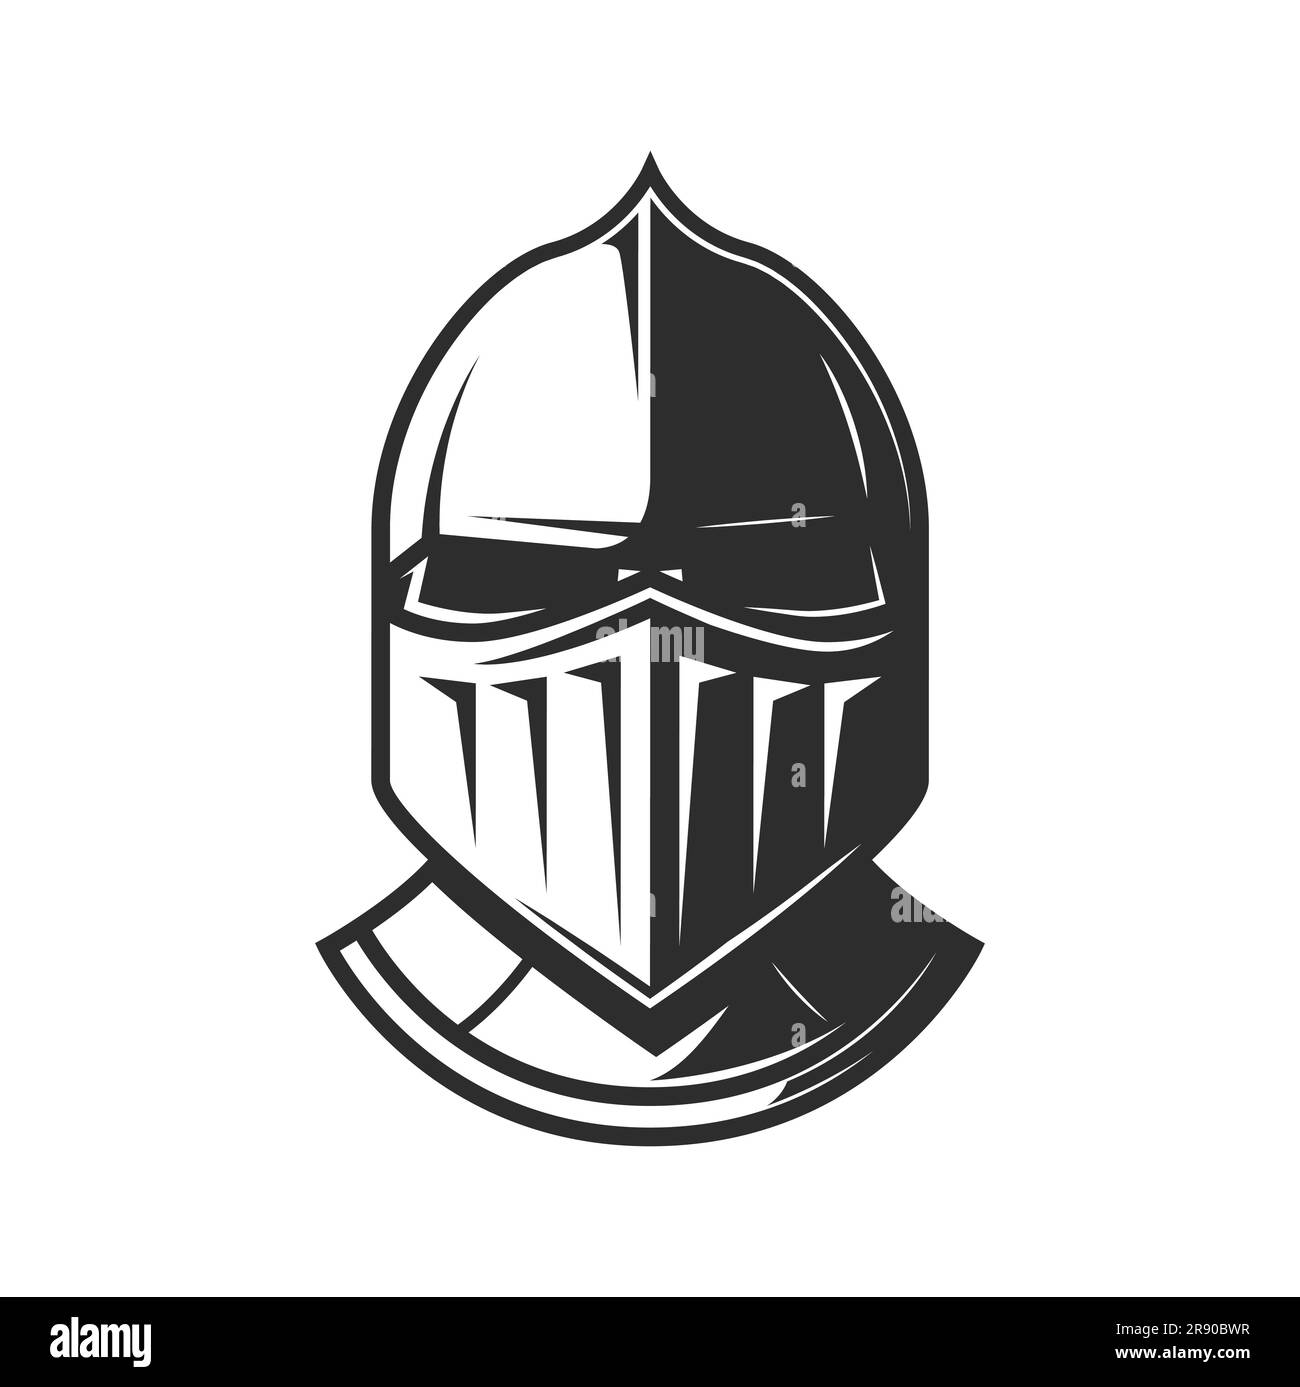 Knight warrior helmet, heraldry armor of medieval soldier or fighter with visor. Vector old helm or ancient armet symbol of knight, roman gladiator, spartan warrior or trojan army soldier helm Stock Vector